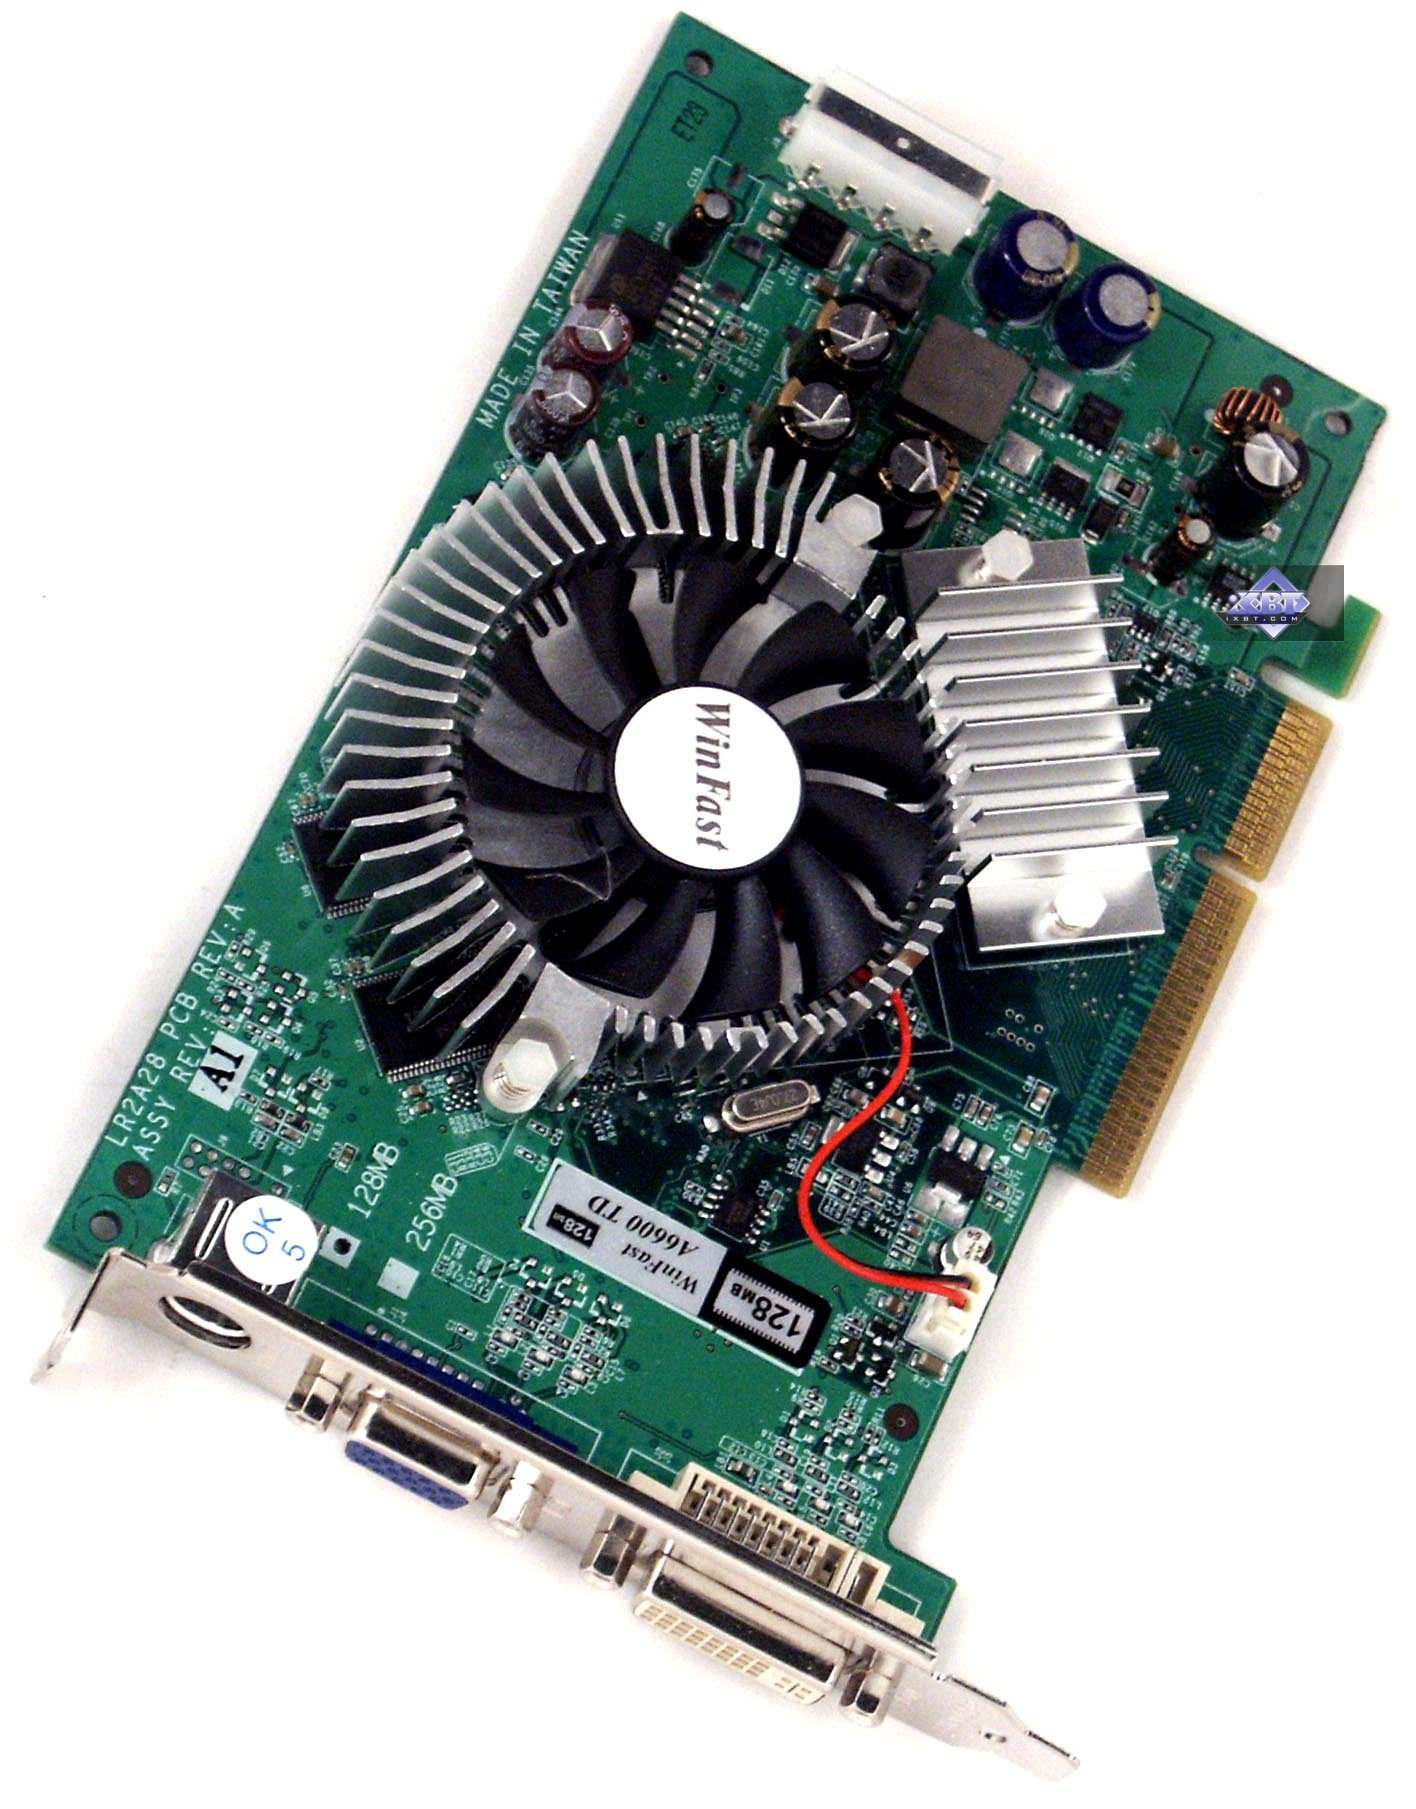 Geforce4 Ti 4200 With Agp8x Driver Download Win7